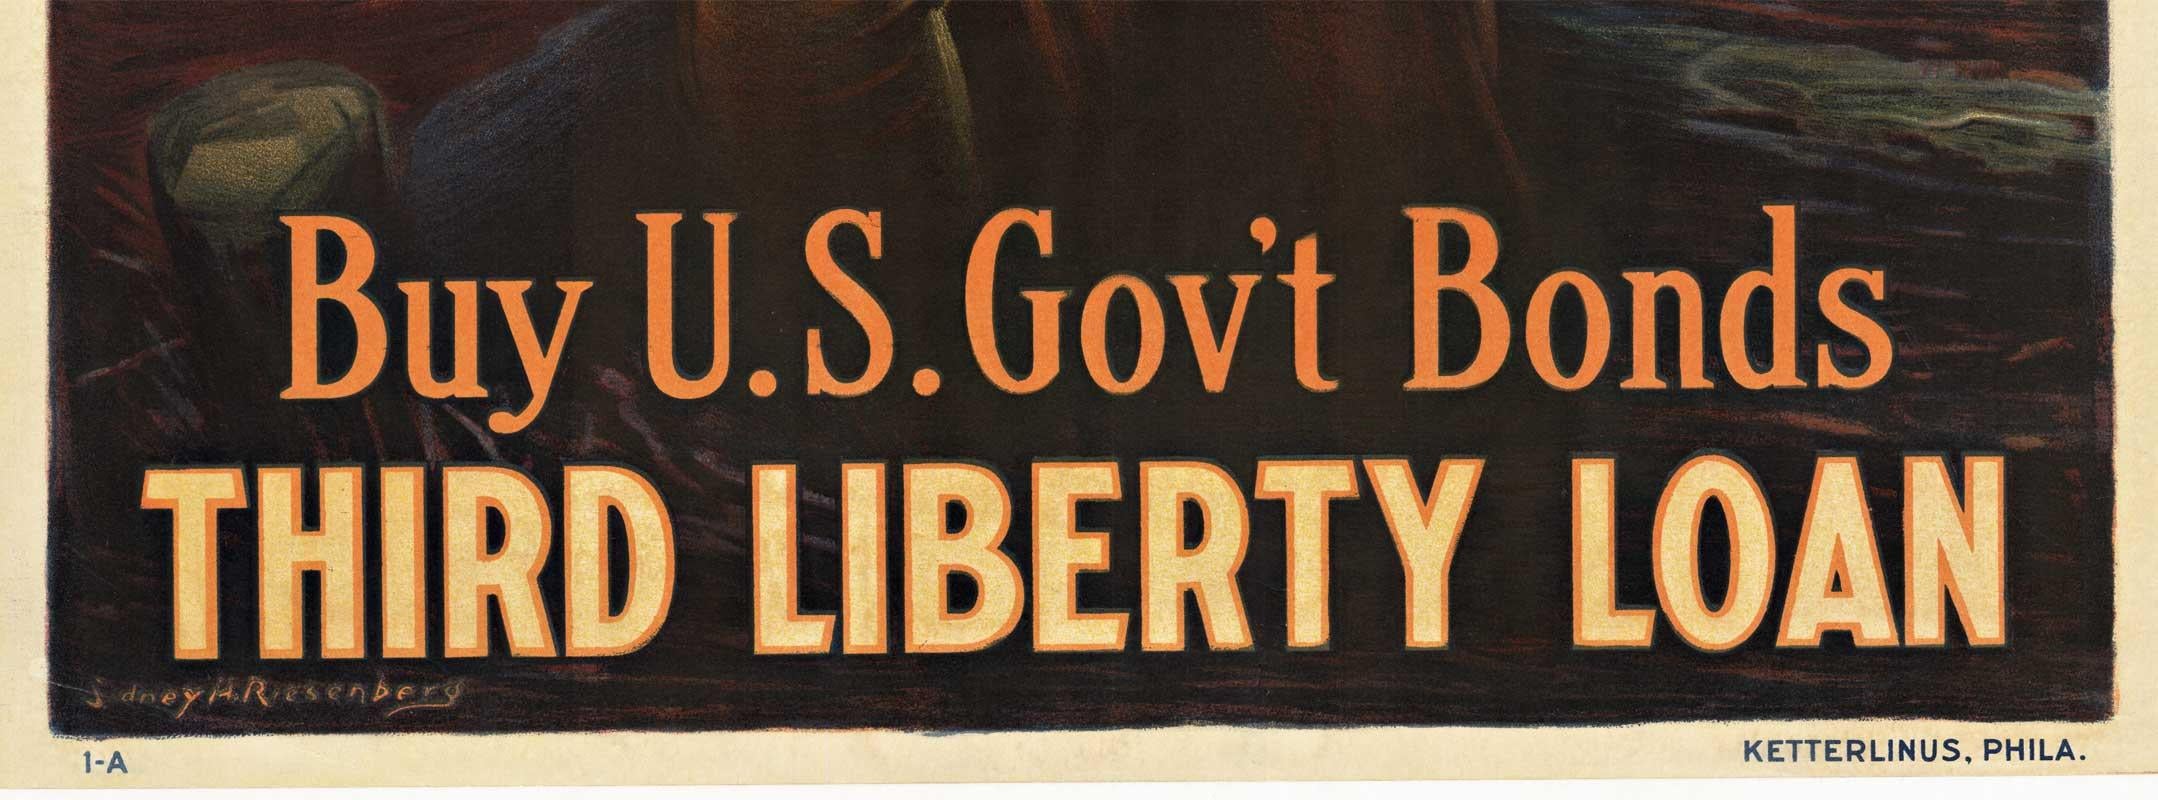 third liberty loan poster meaning